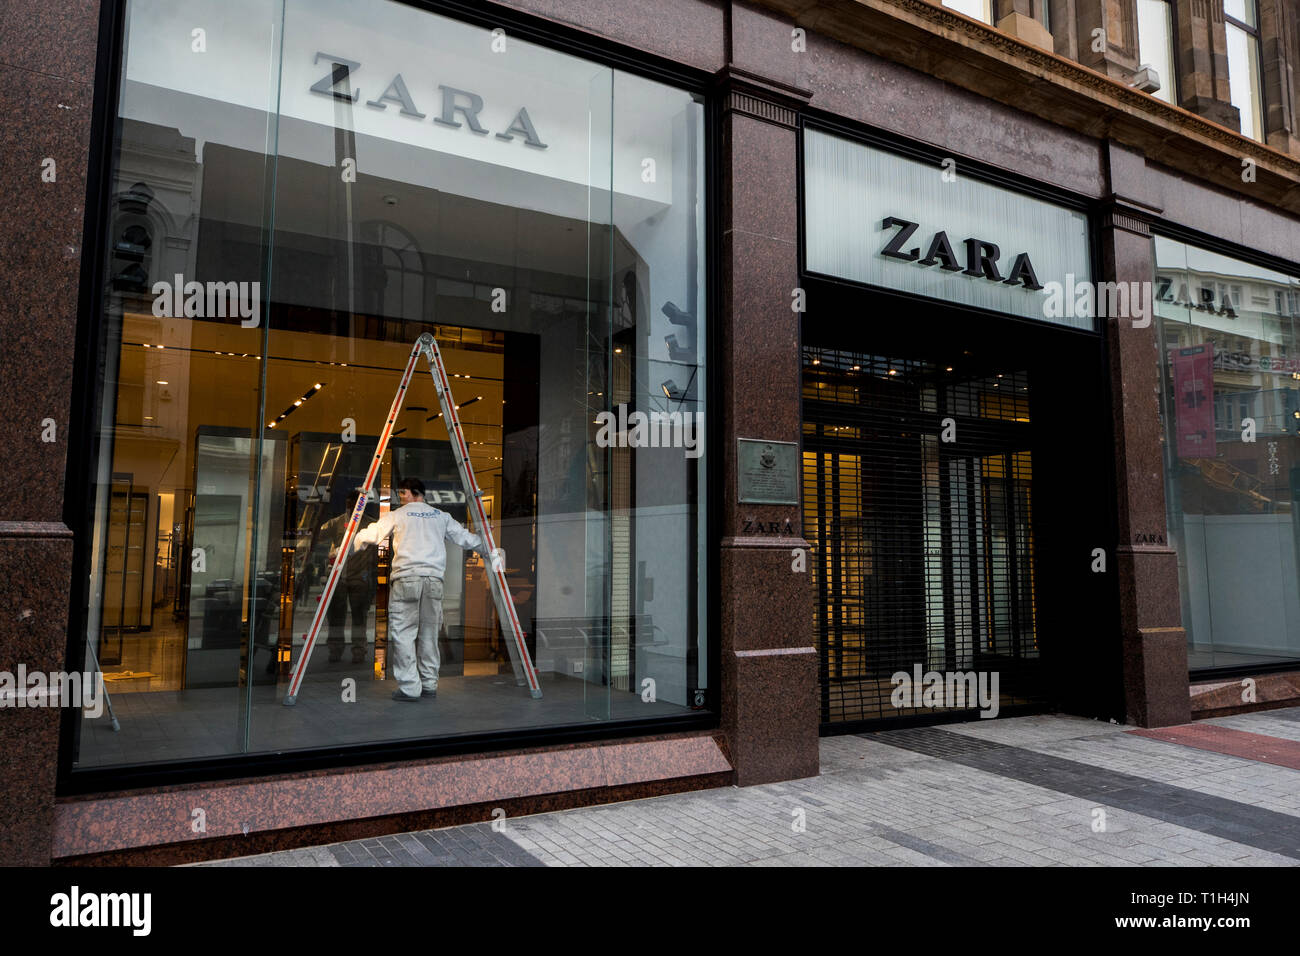 A shop fitter in Zara's Belfast Donegall Place store, ahead on media  reports the store will